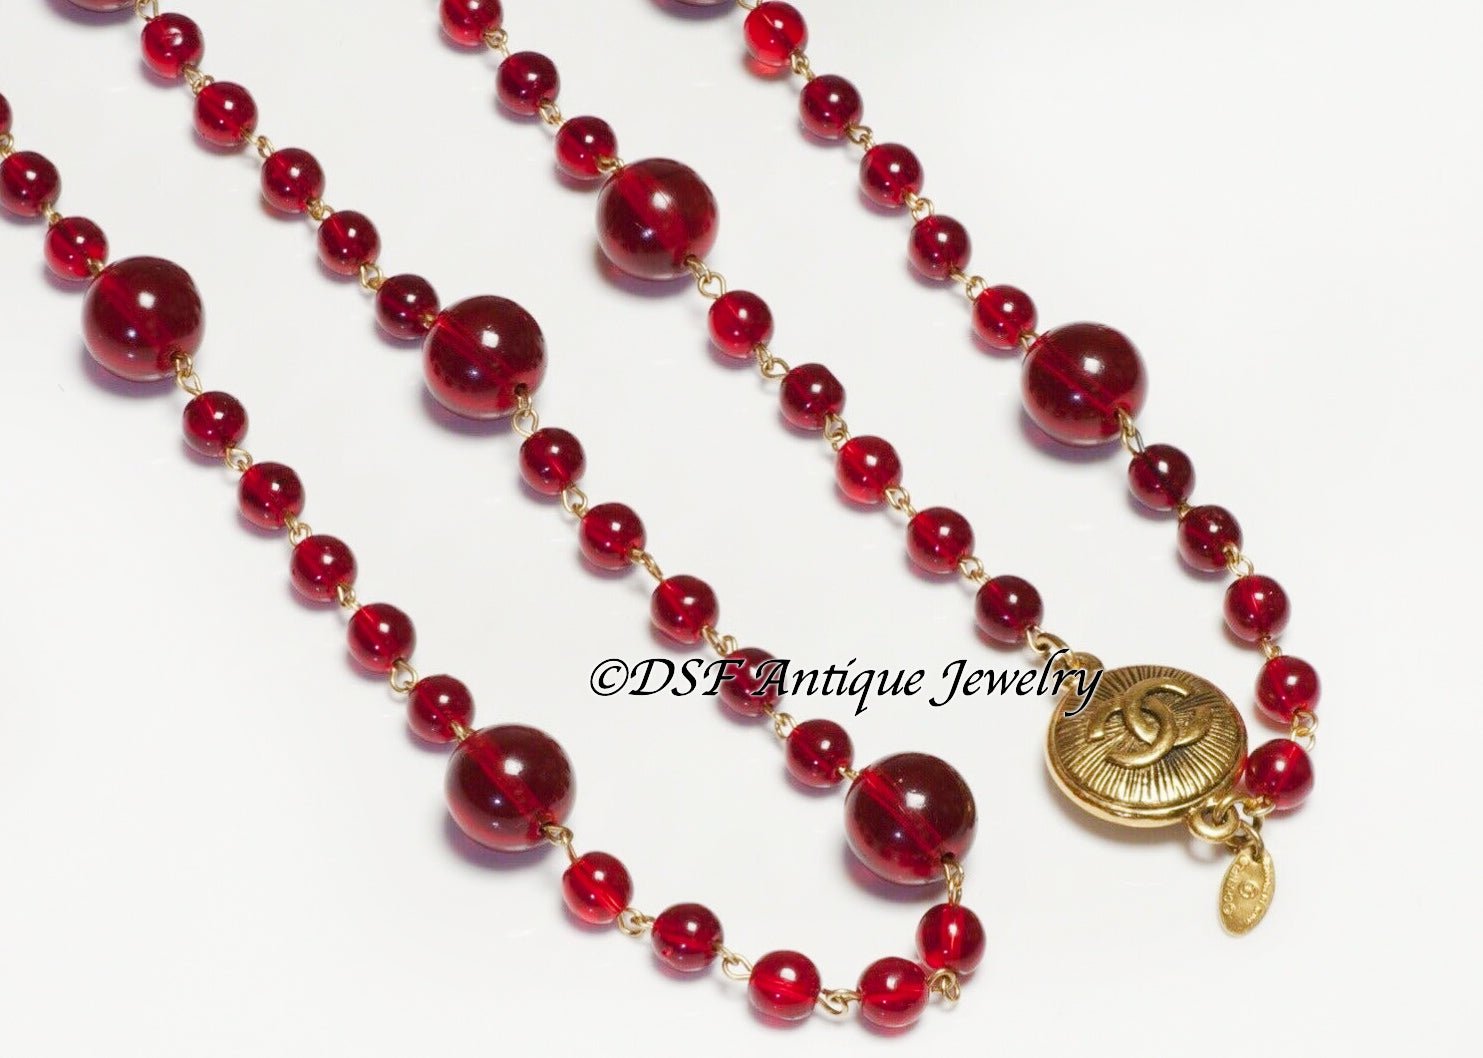 CHANEL Paris 1990’s Red Poured Glass Beads Sautoir Chain Necklace